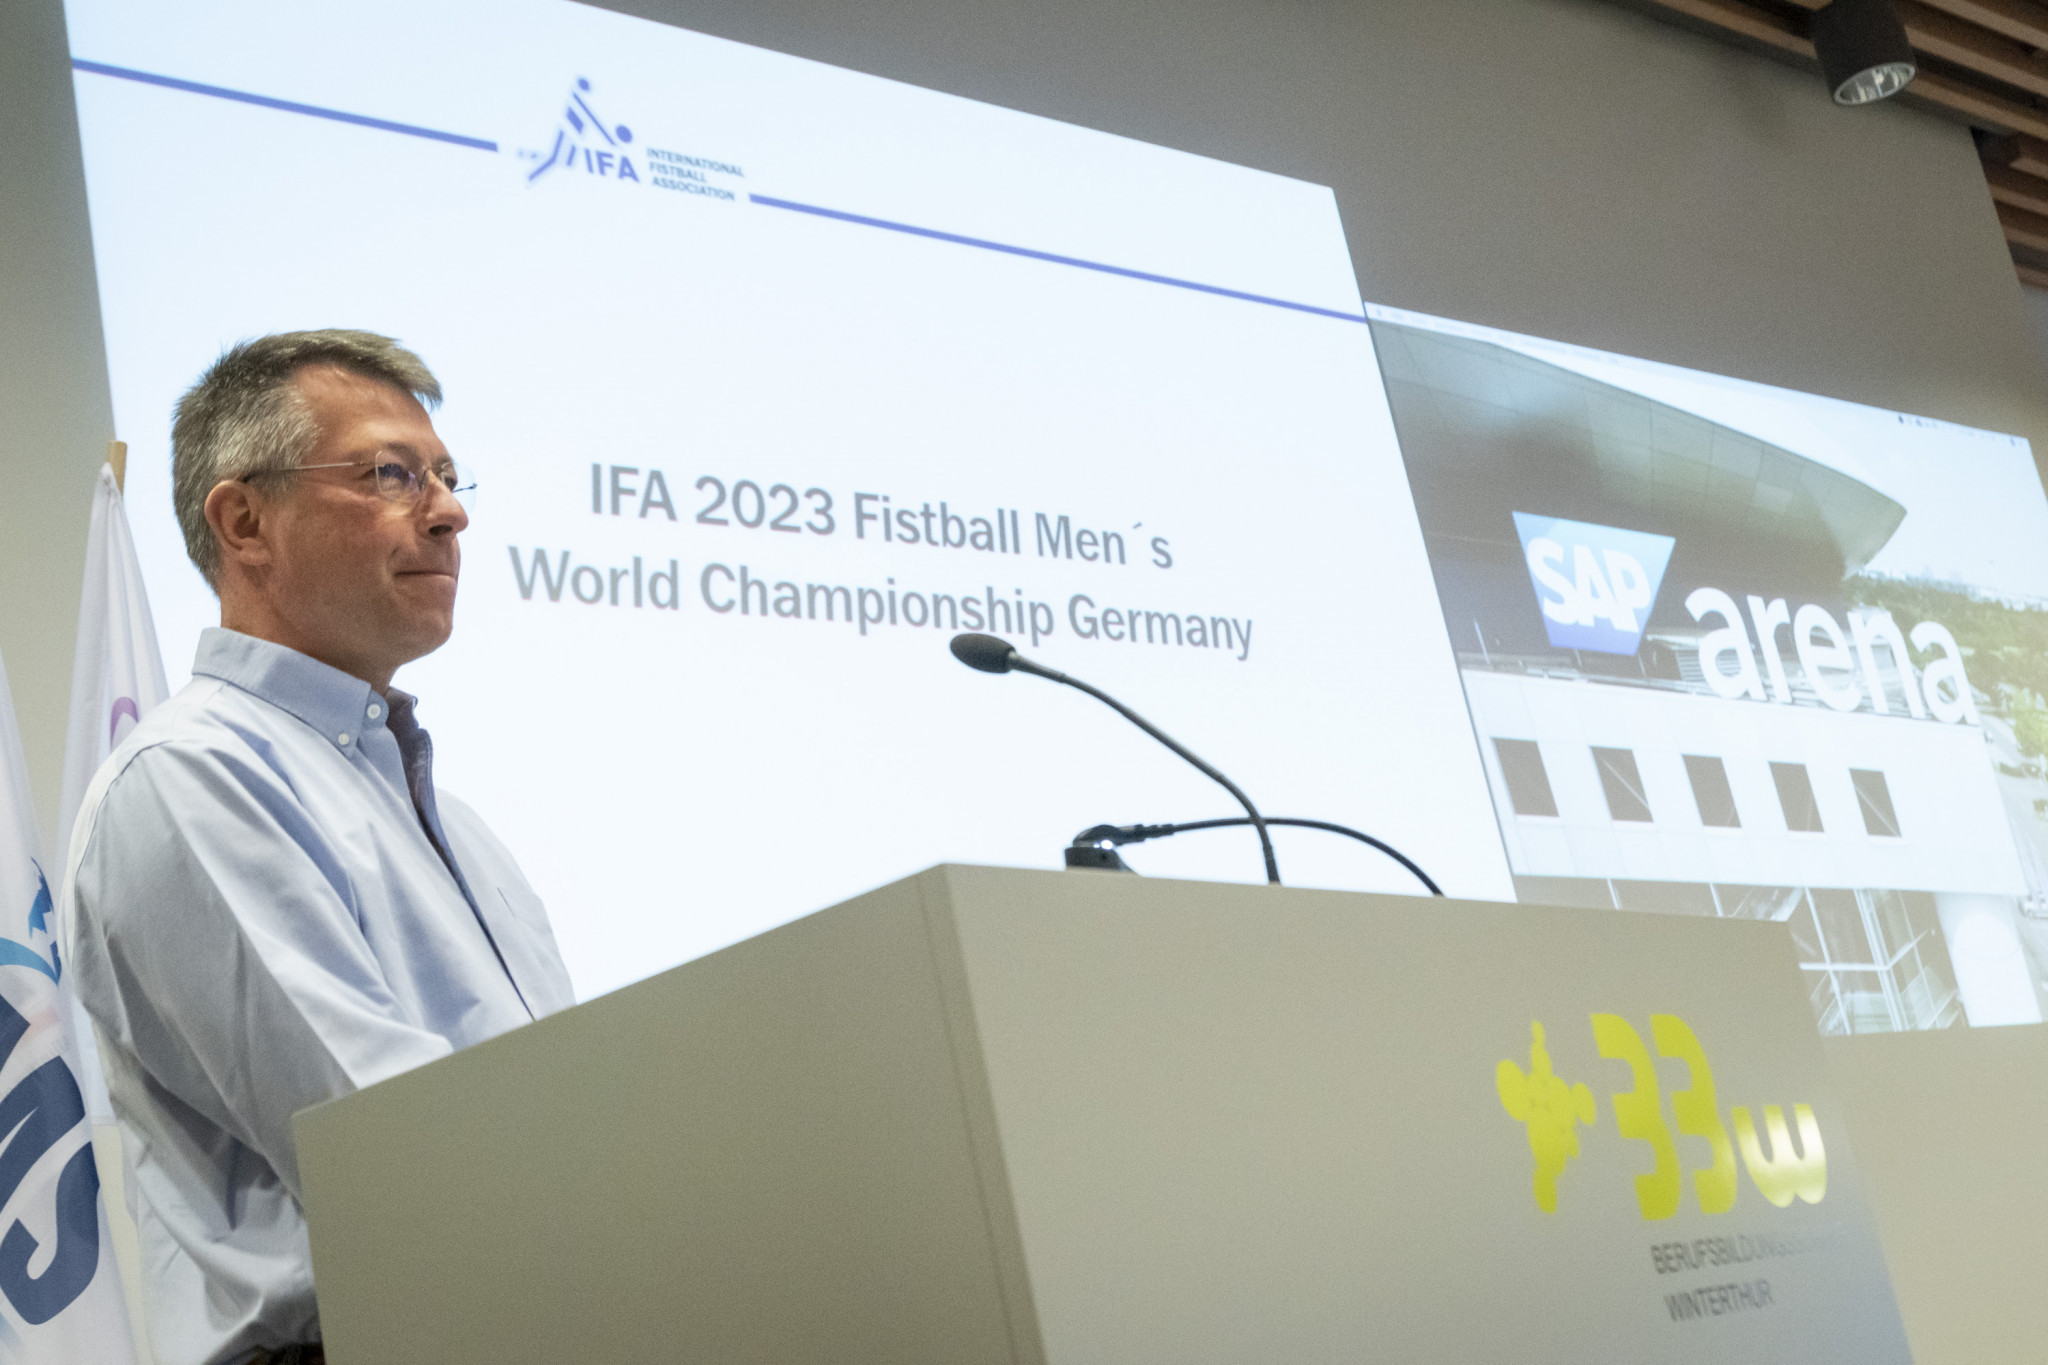 Mannheim was announced as the host city for the 2023 International Fistball Association Men's World Fistball Championship at the IFA Congress in Winterthur in Switzerland ©IFA